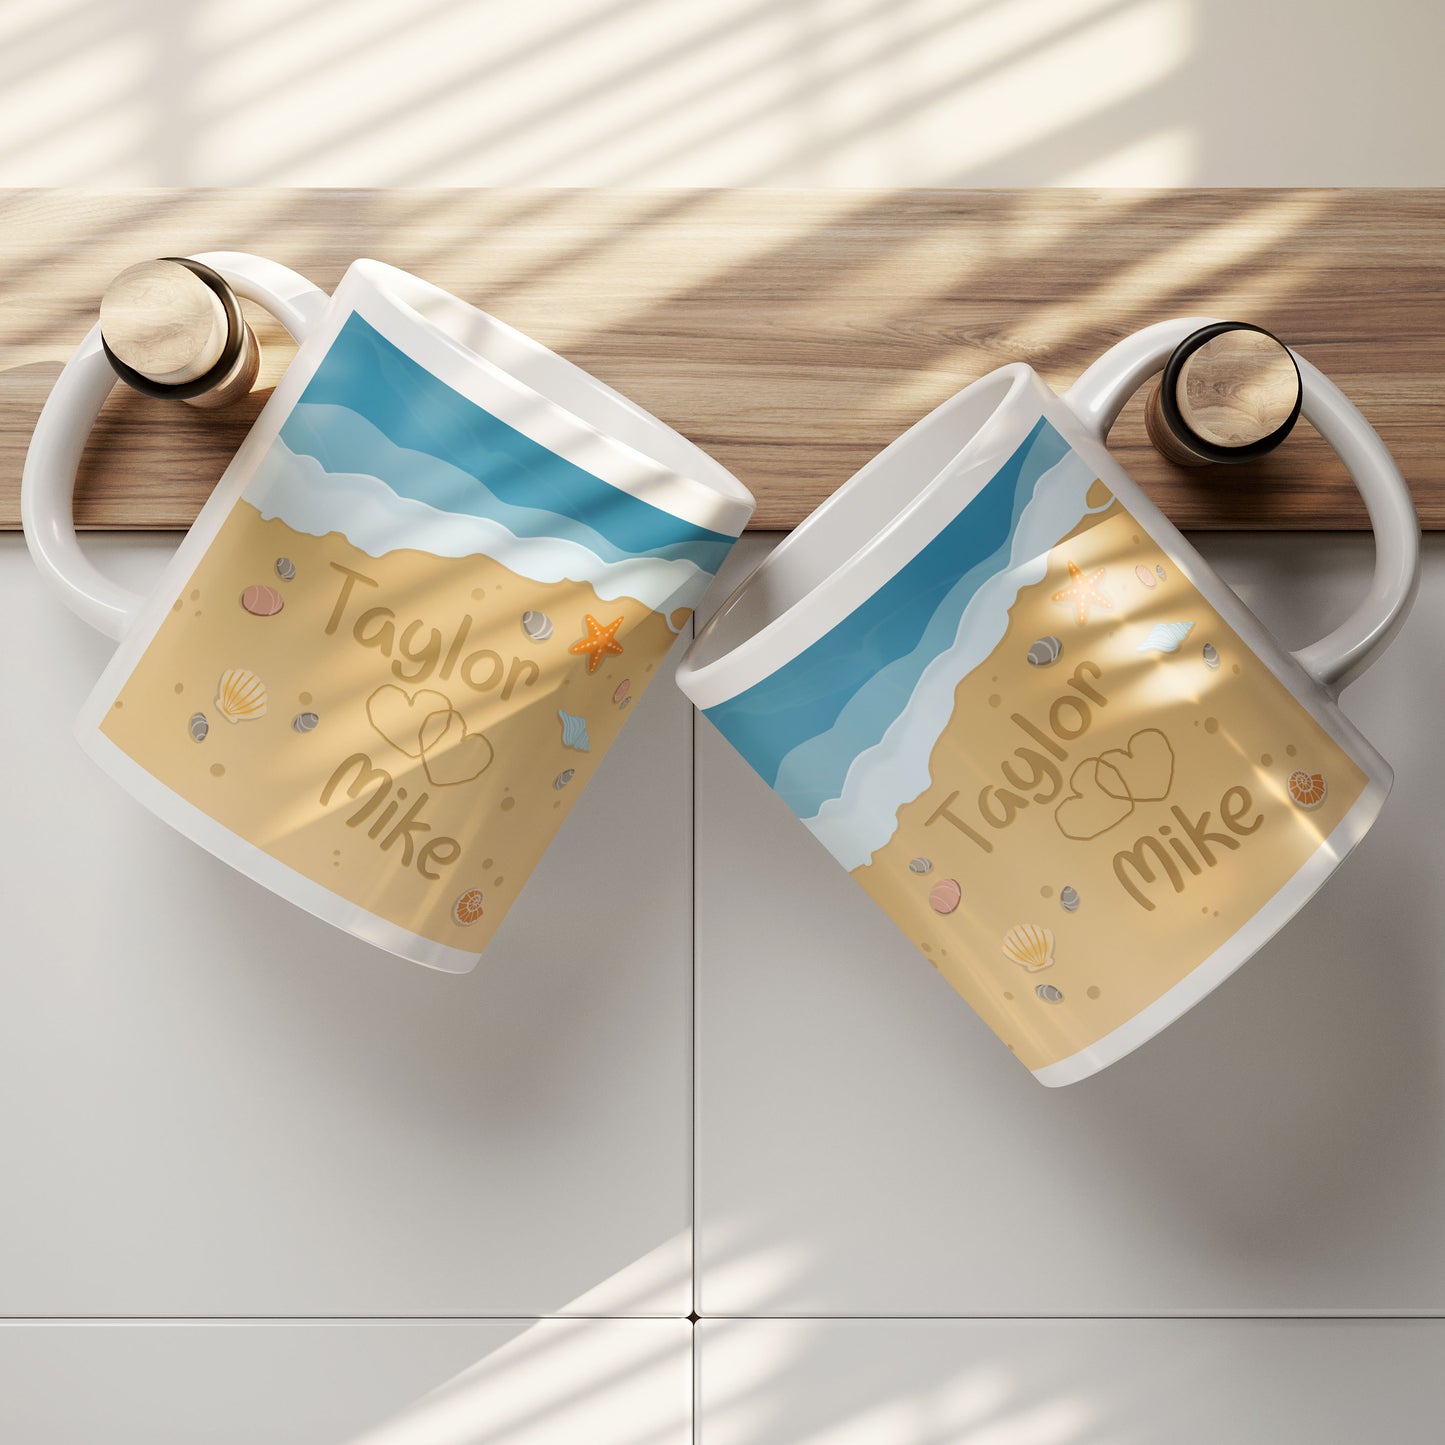 Personalized Love at the Beach Mug in two sizes